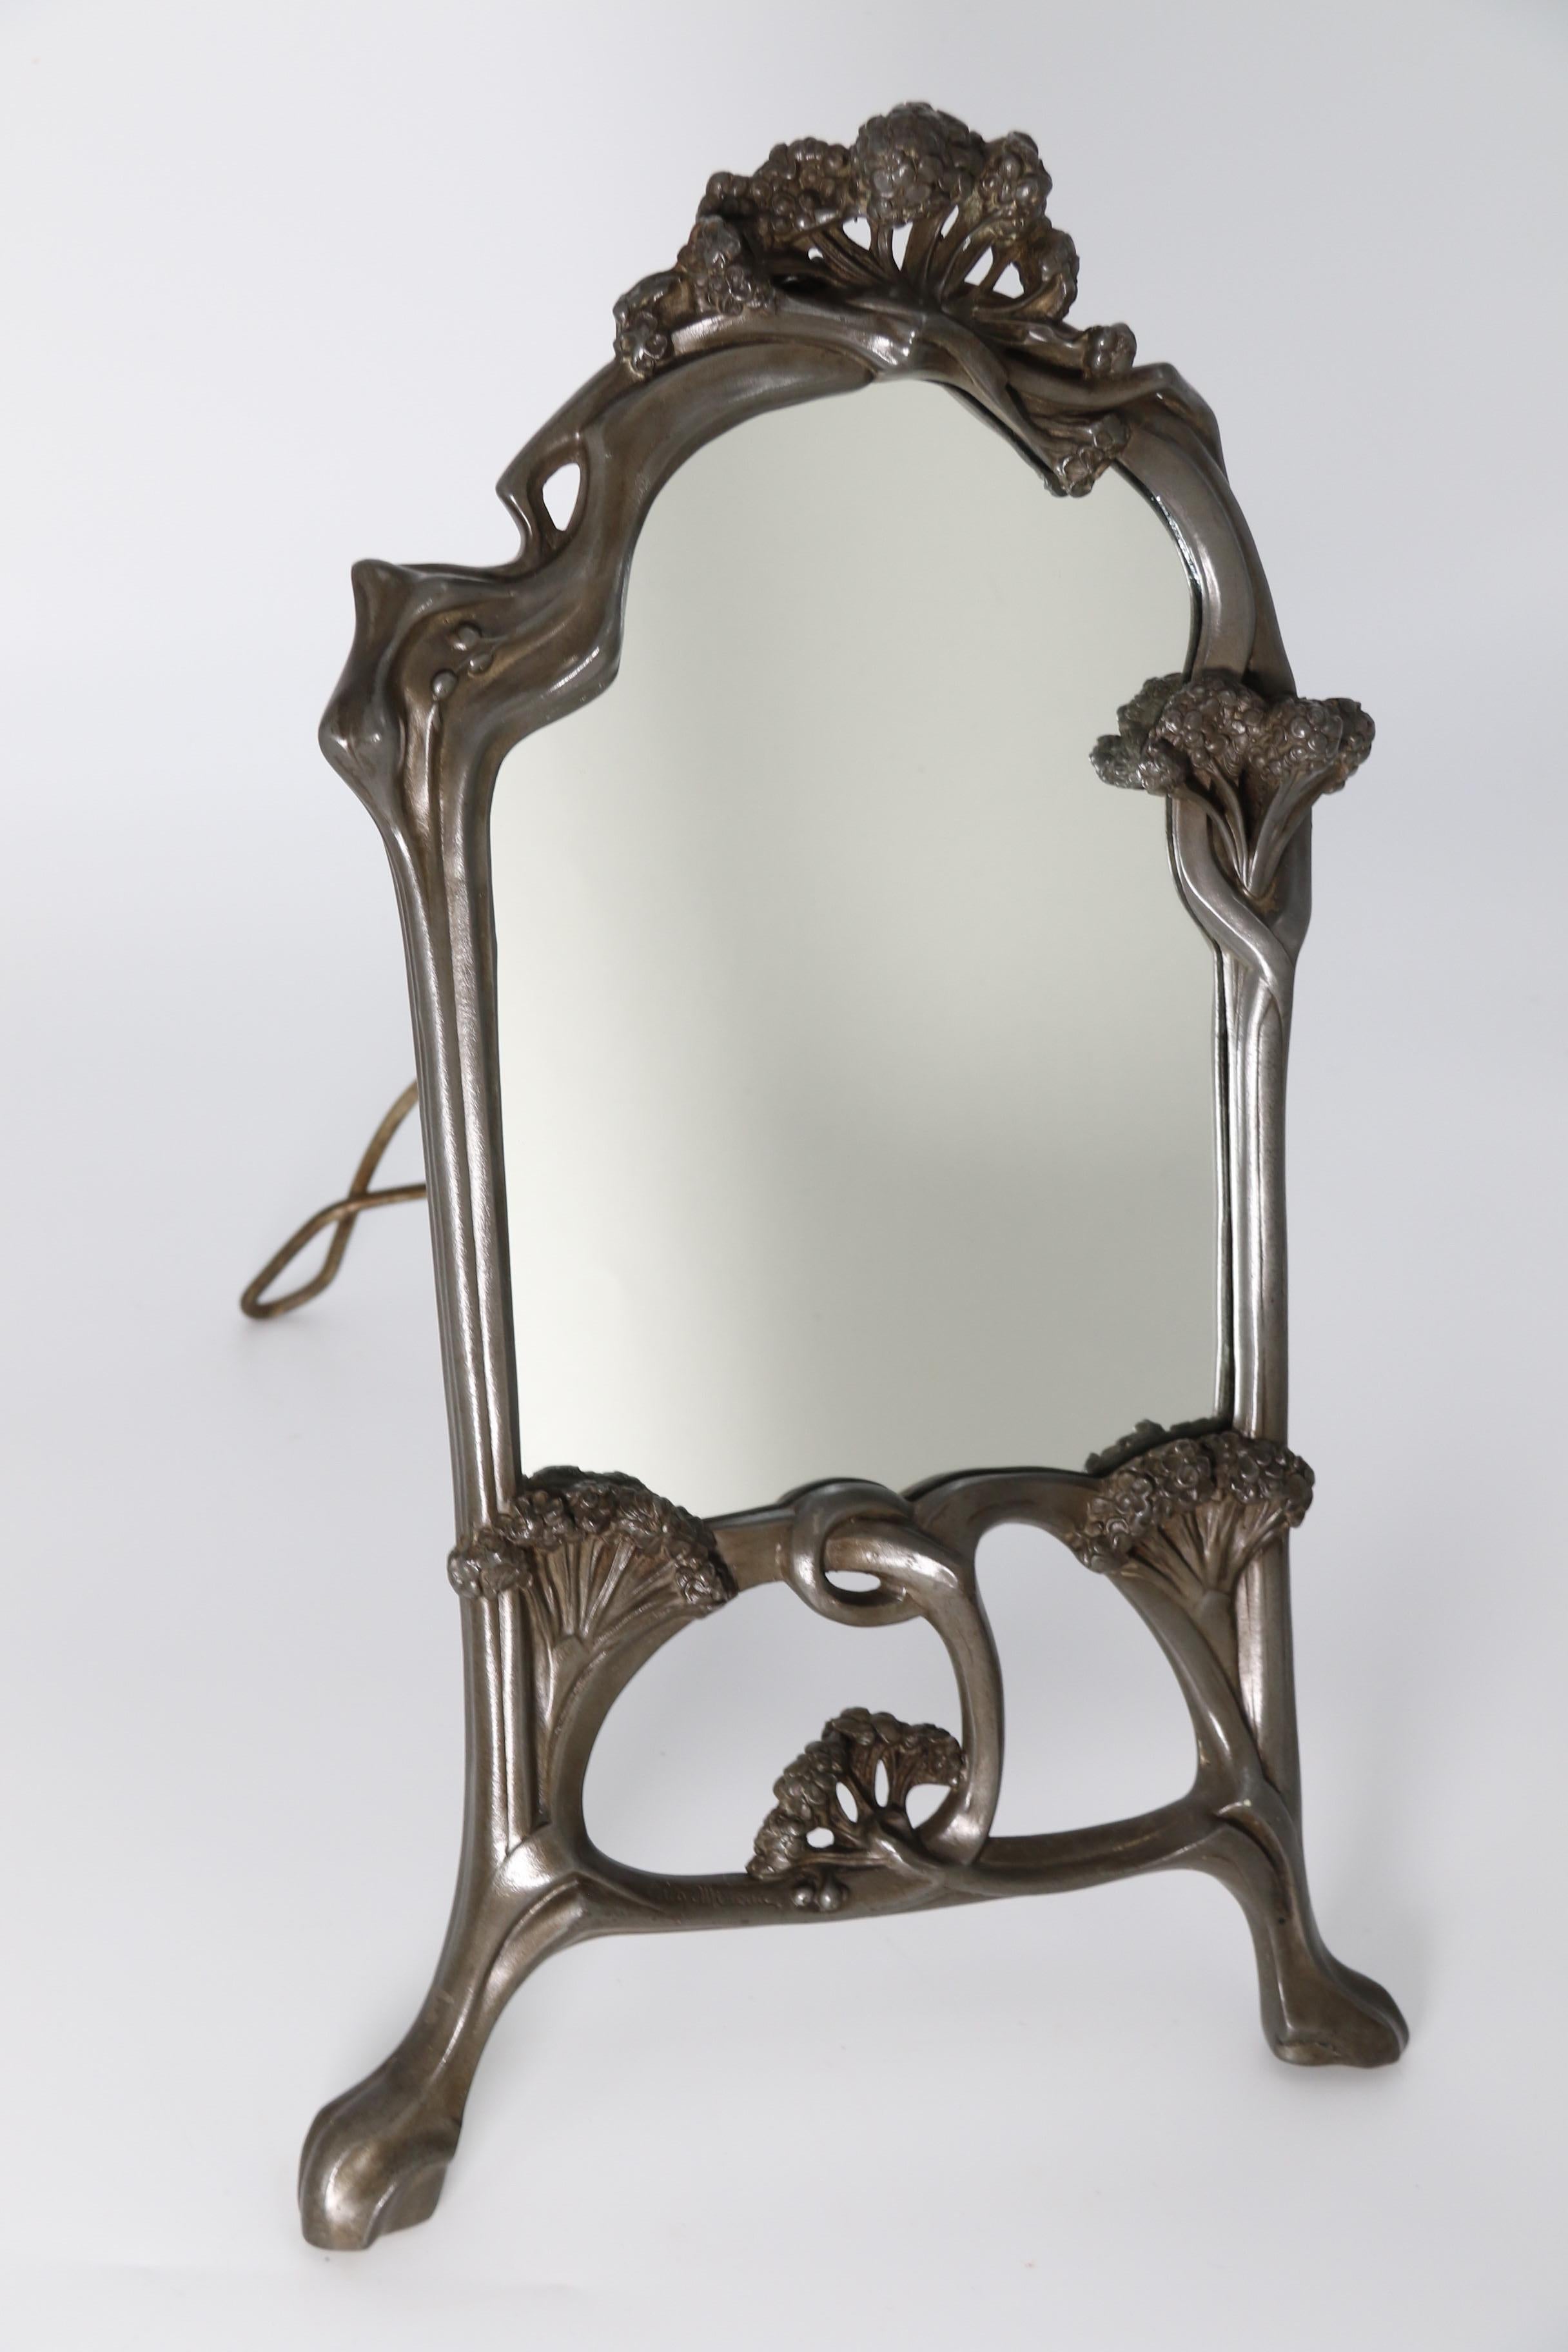 
This stylish and heavily cast solid pewter mirror is a freestanding table mirror with a hinged easel back stand that folds out onto a stop hinge to support the mirror.

The mirror frame is a sculptural work of art. It was designed and produced by